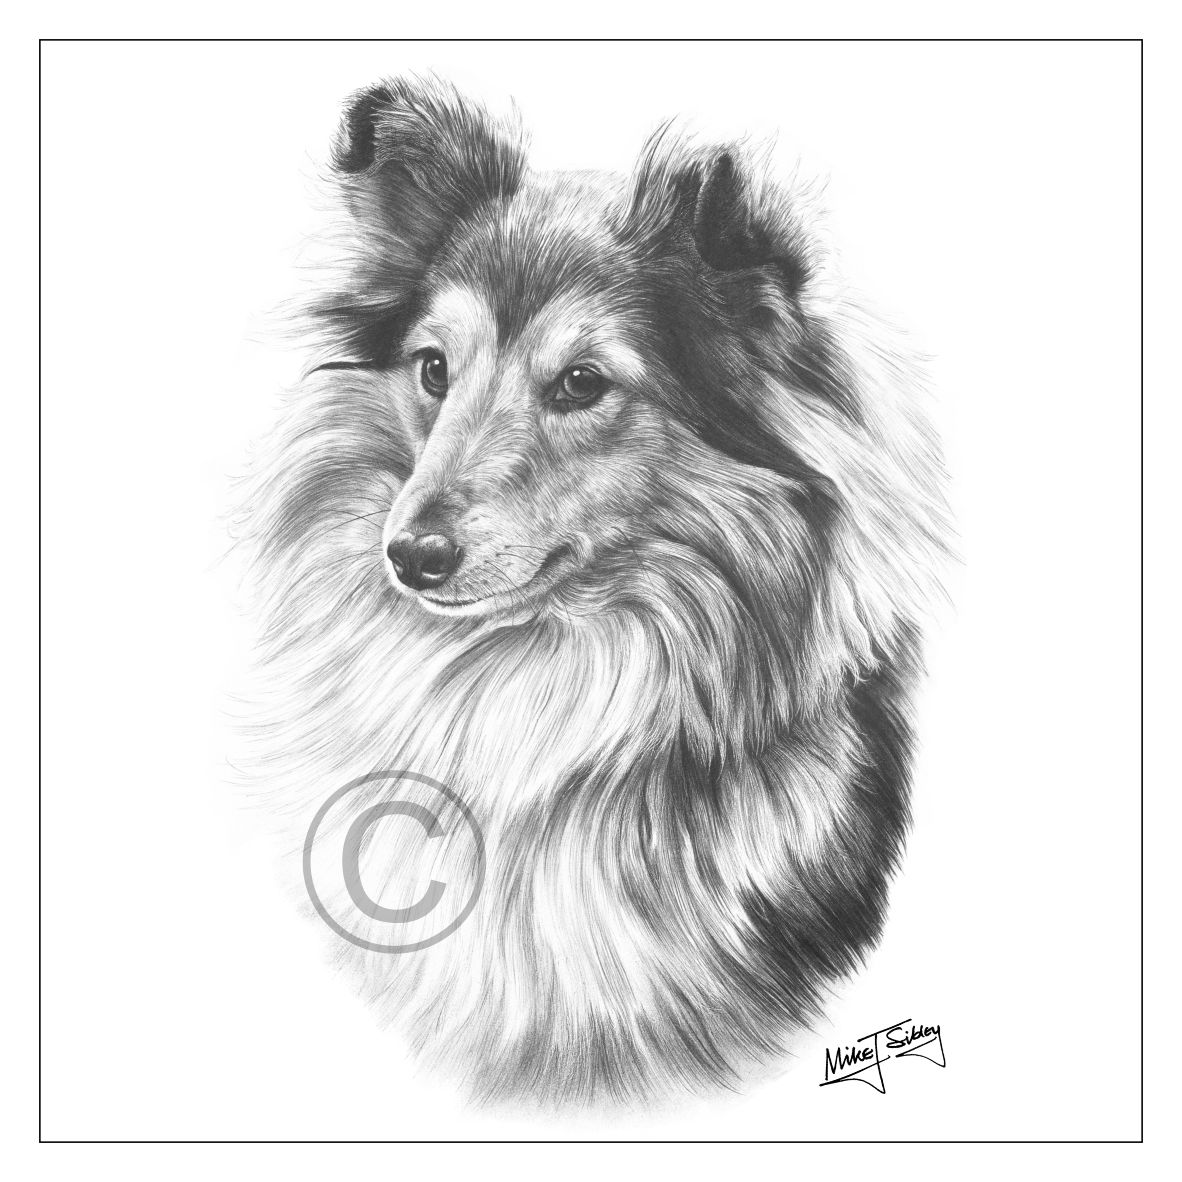 Mike Sibley Design Sheltie Greeting Card